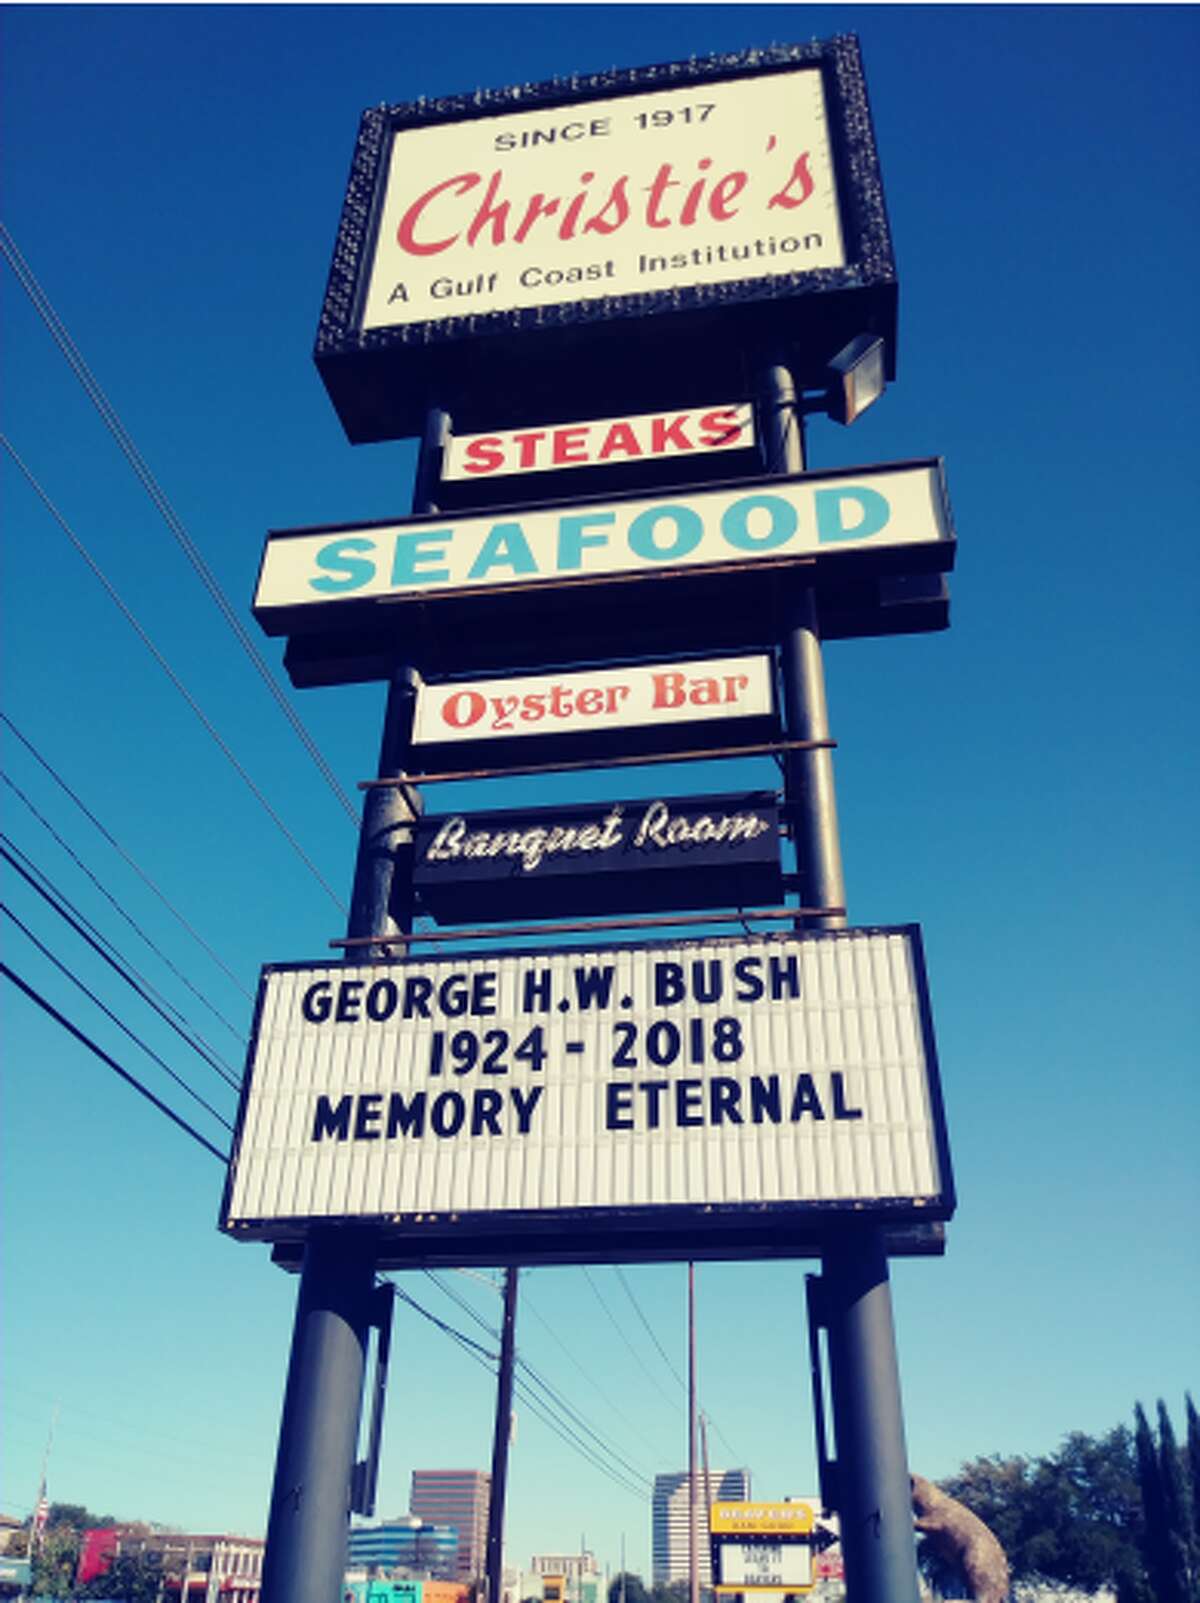 PHOTOS: Christie's says goodbye to Bush 41, a beloved regular  George and Barbara Bush were regular customers at Christie's Seafood. After Bush passed away on Friday -- seven months after his wife -- the restaurant issued a heartfelt goodbye. >>> Click through to see more memorial of Bush at the restaurant 